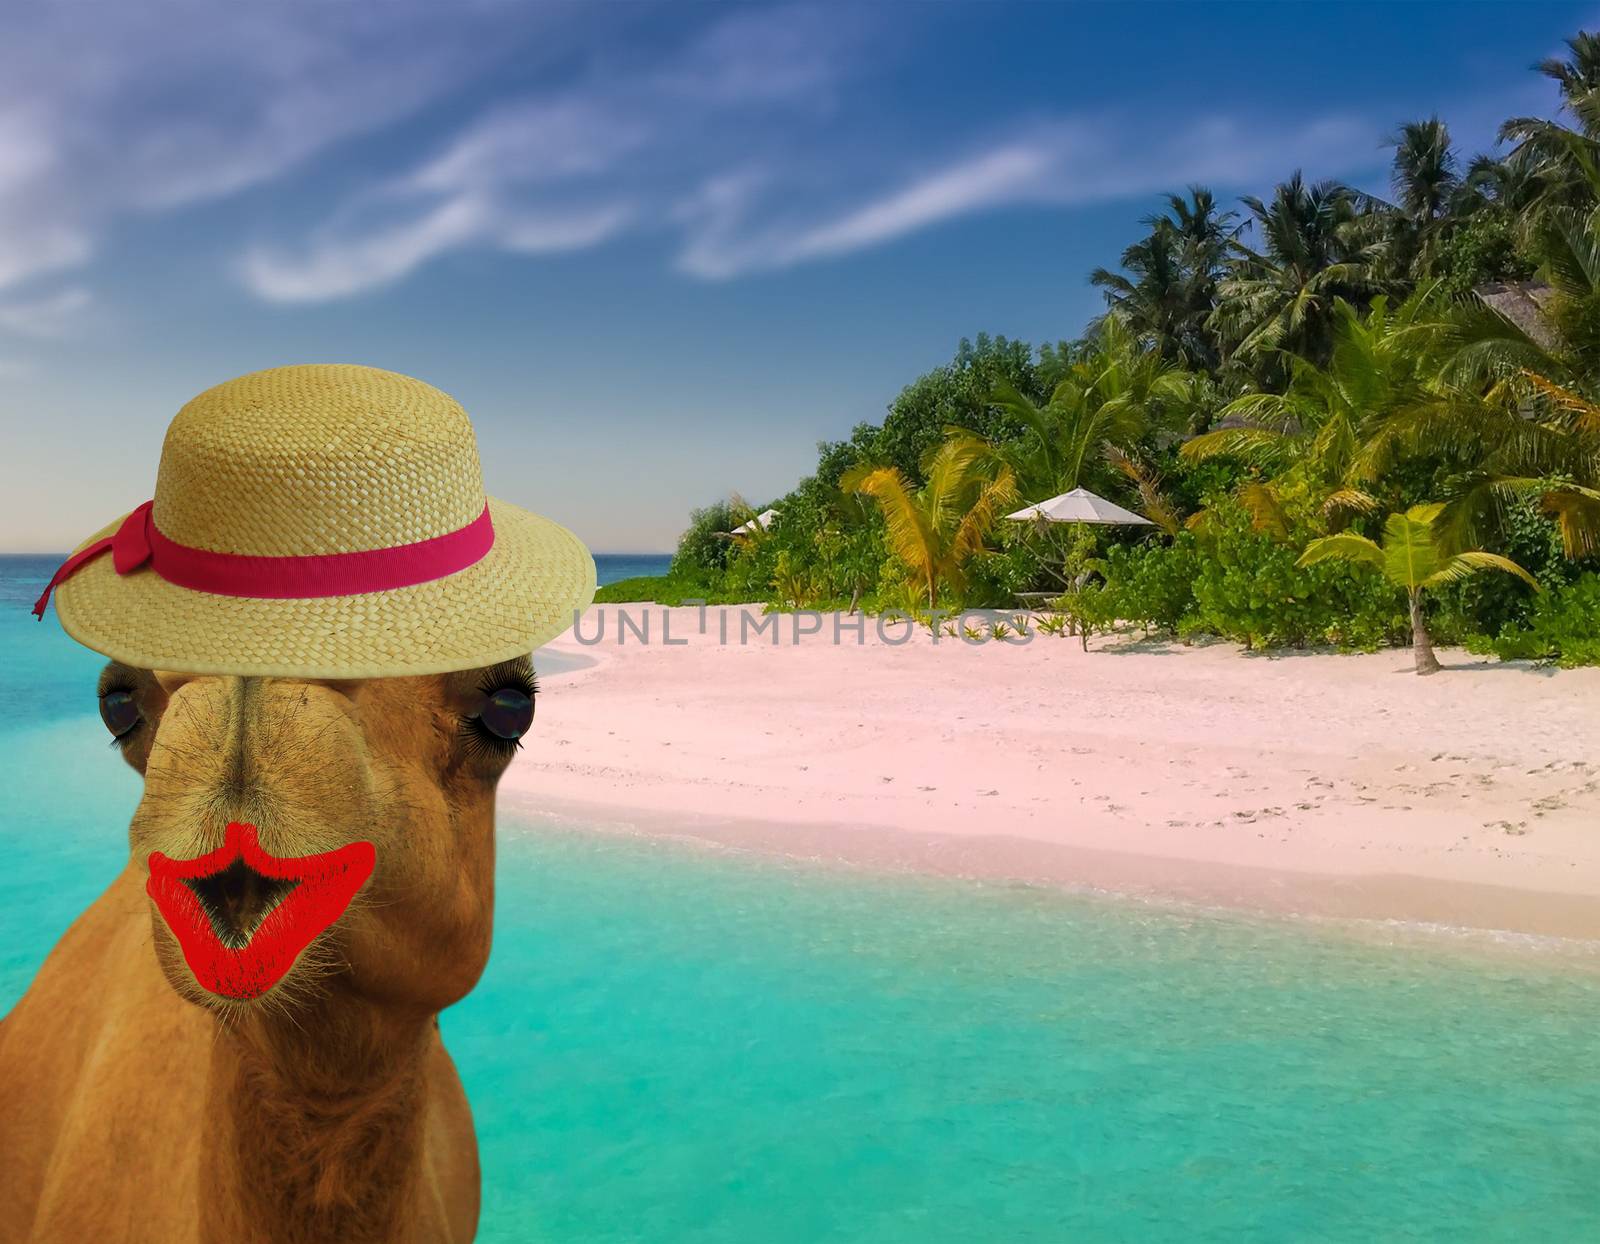 funny holiday concept of a camel in make up and wearing a straw hat at a tropical beach